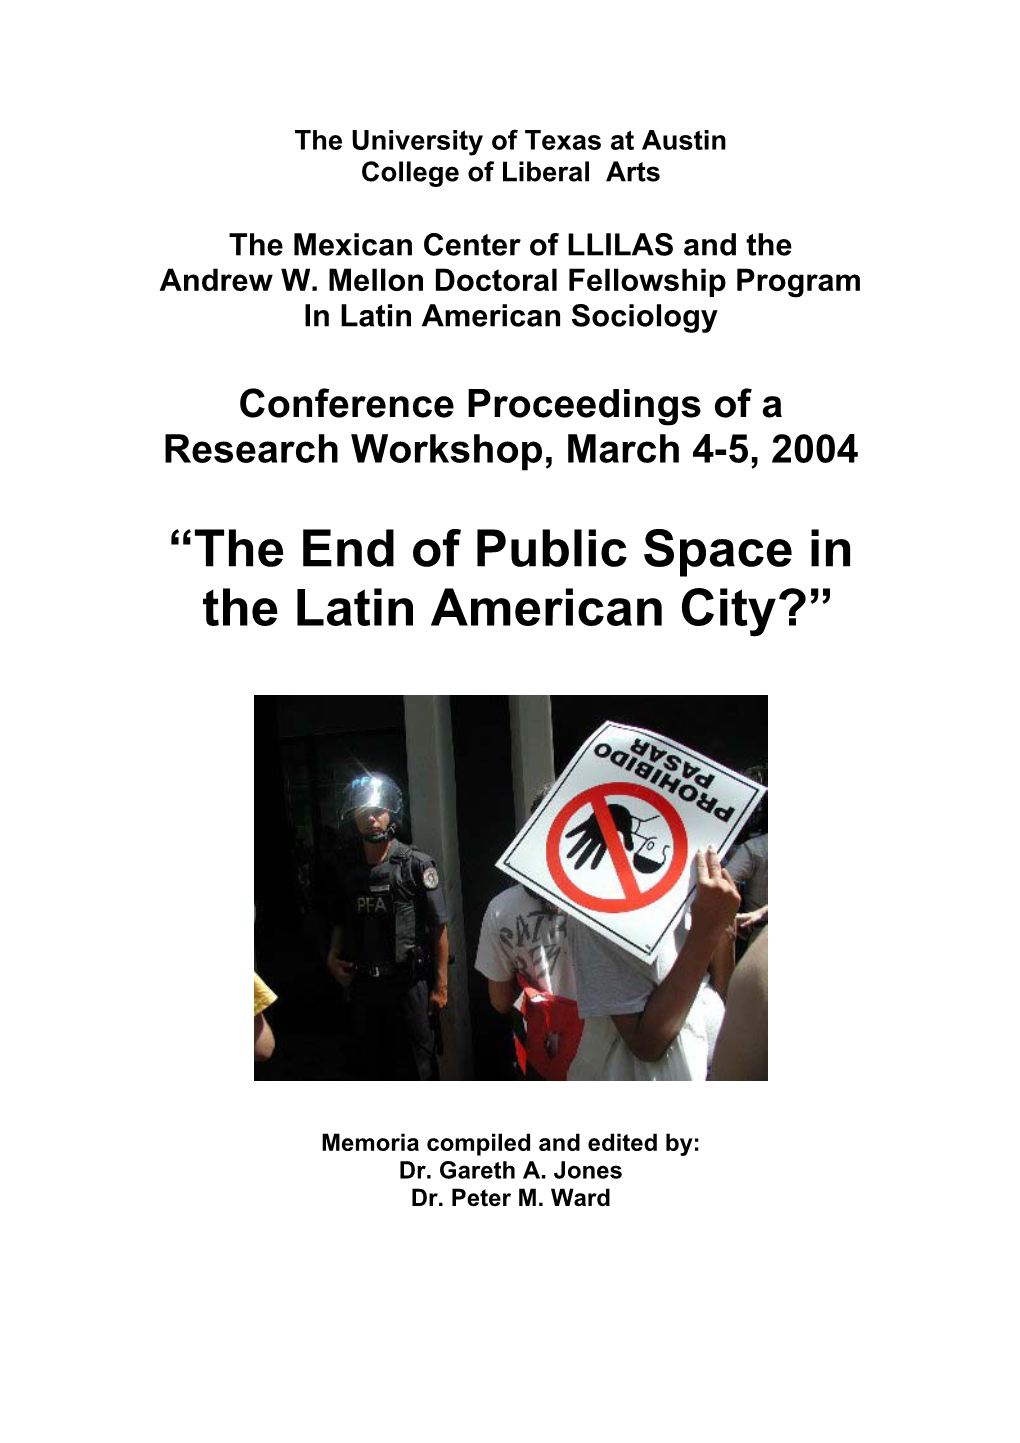 “The End of Public Space in the Latin American City?”